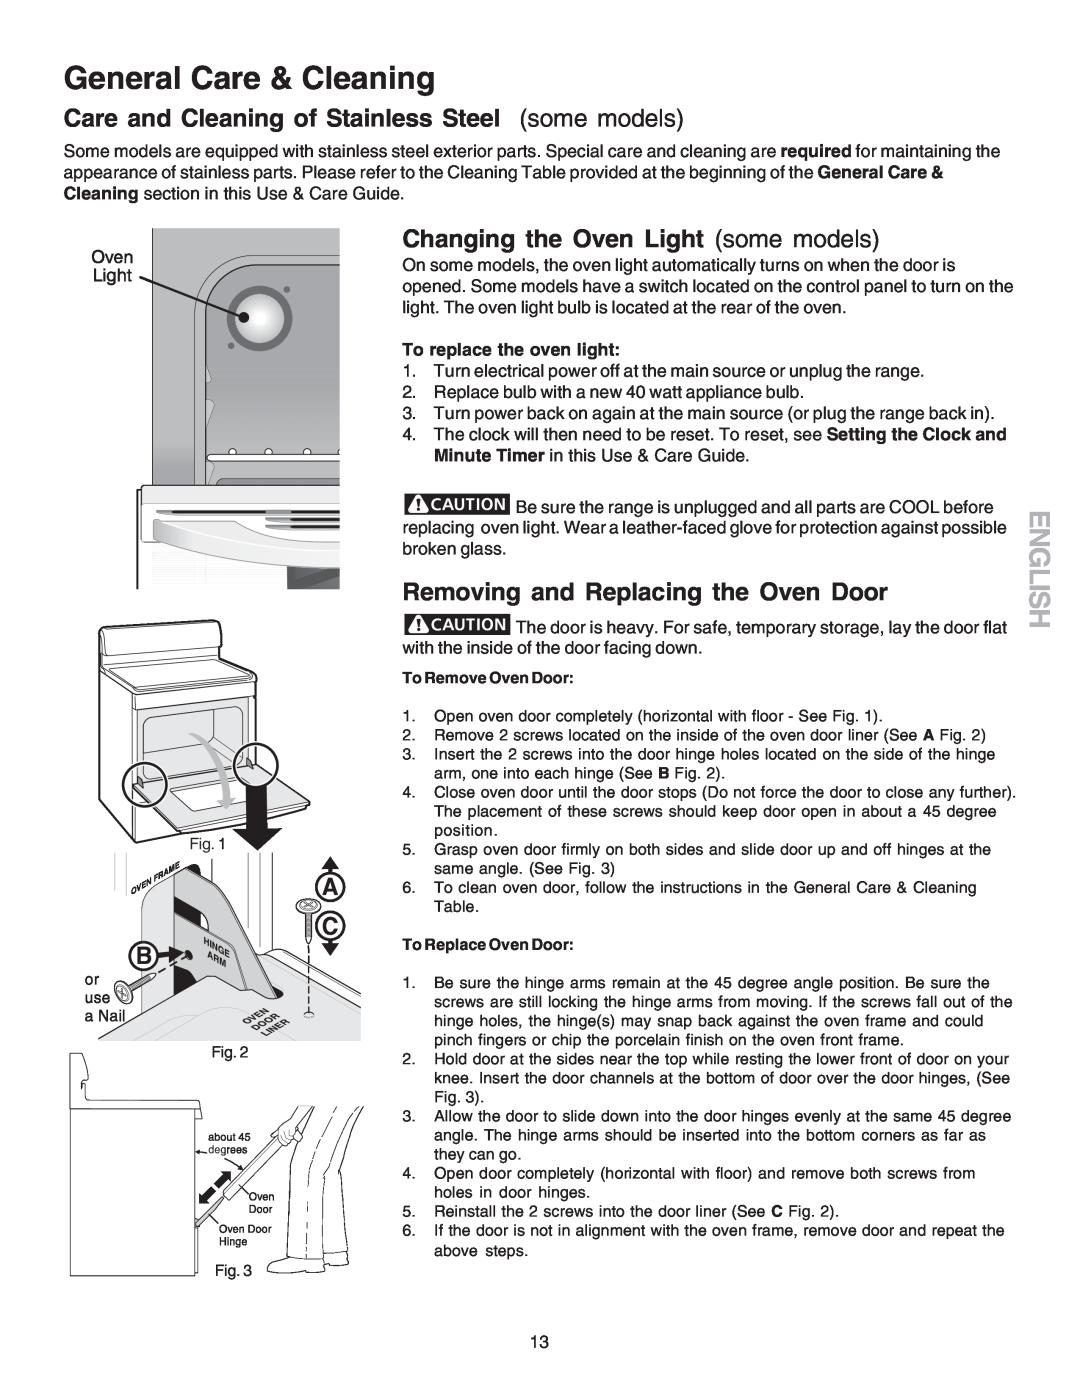 Kenmore 790.9083, 790.9006 Care and Cleaning of Stainless Steel some models, Changing the Oven Light some models, English 